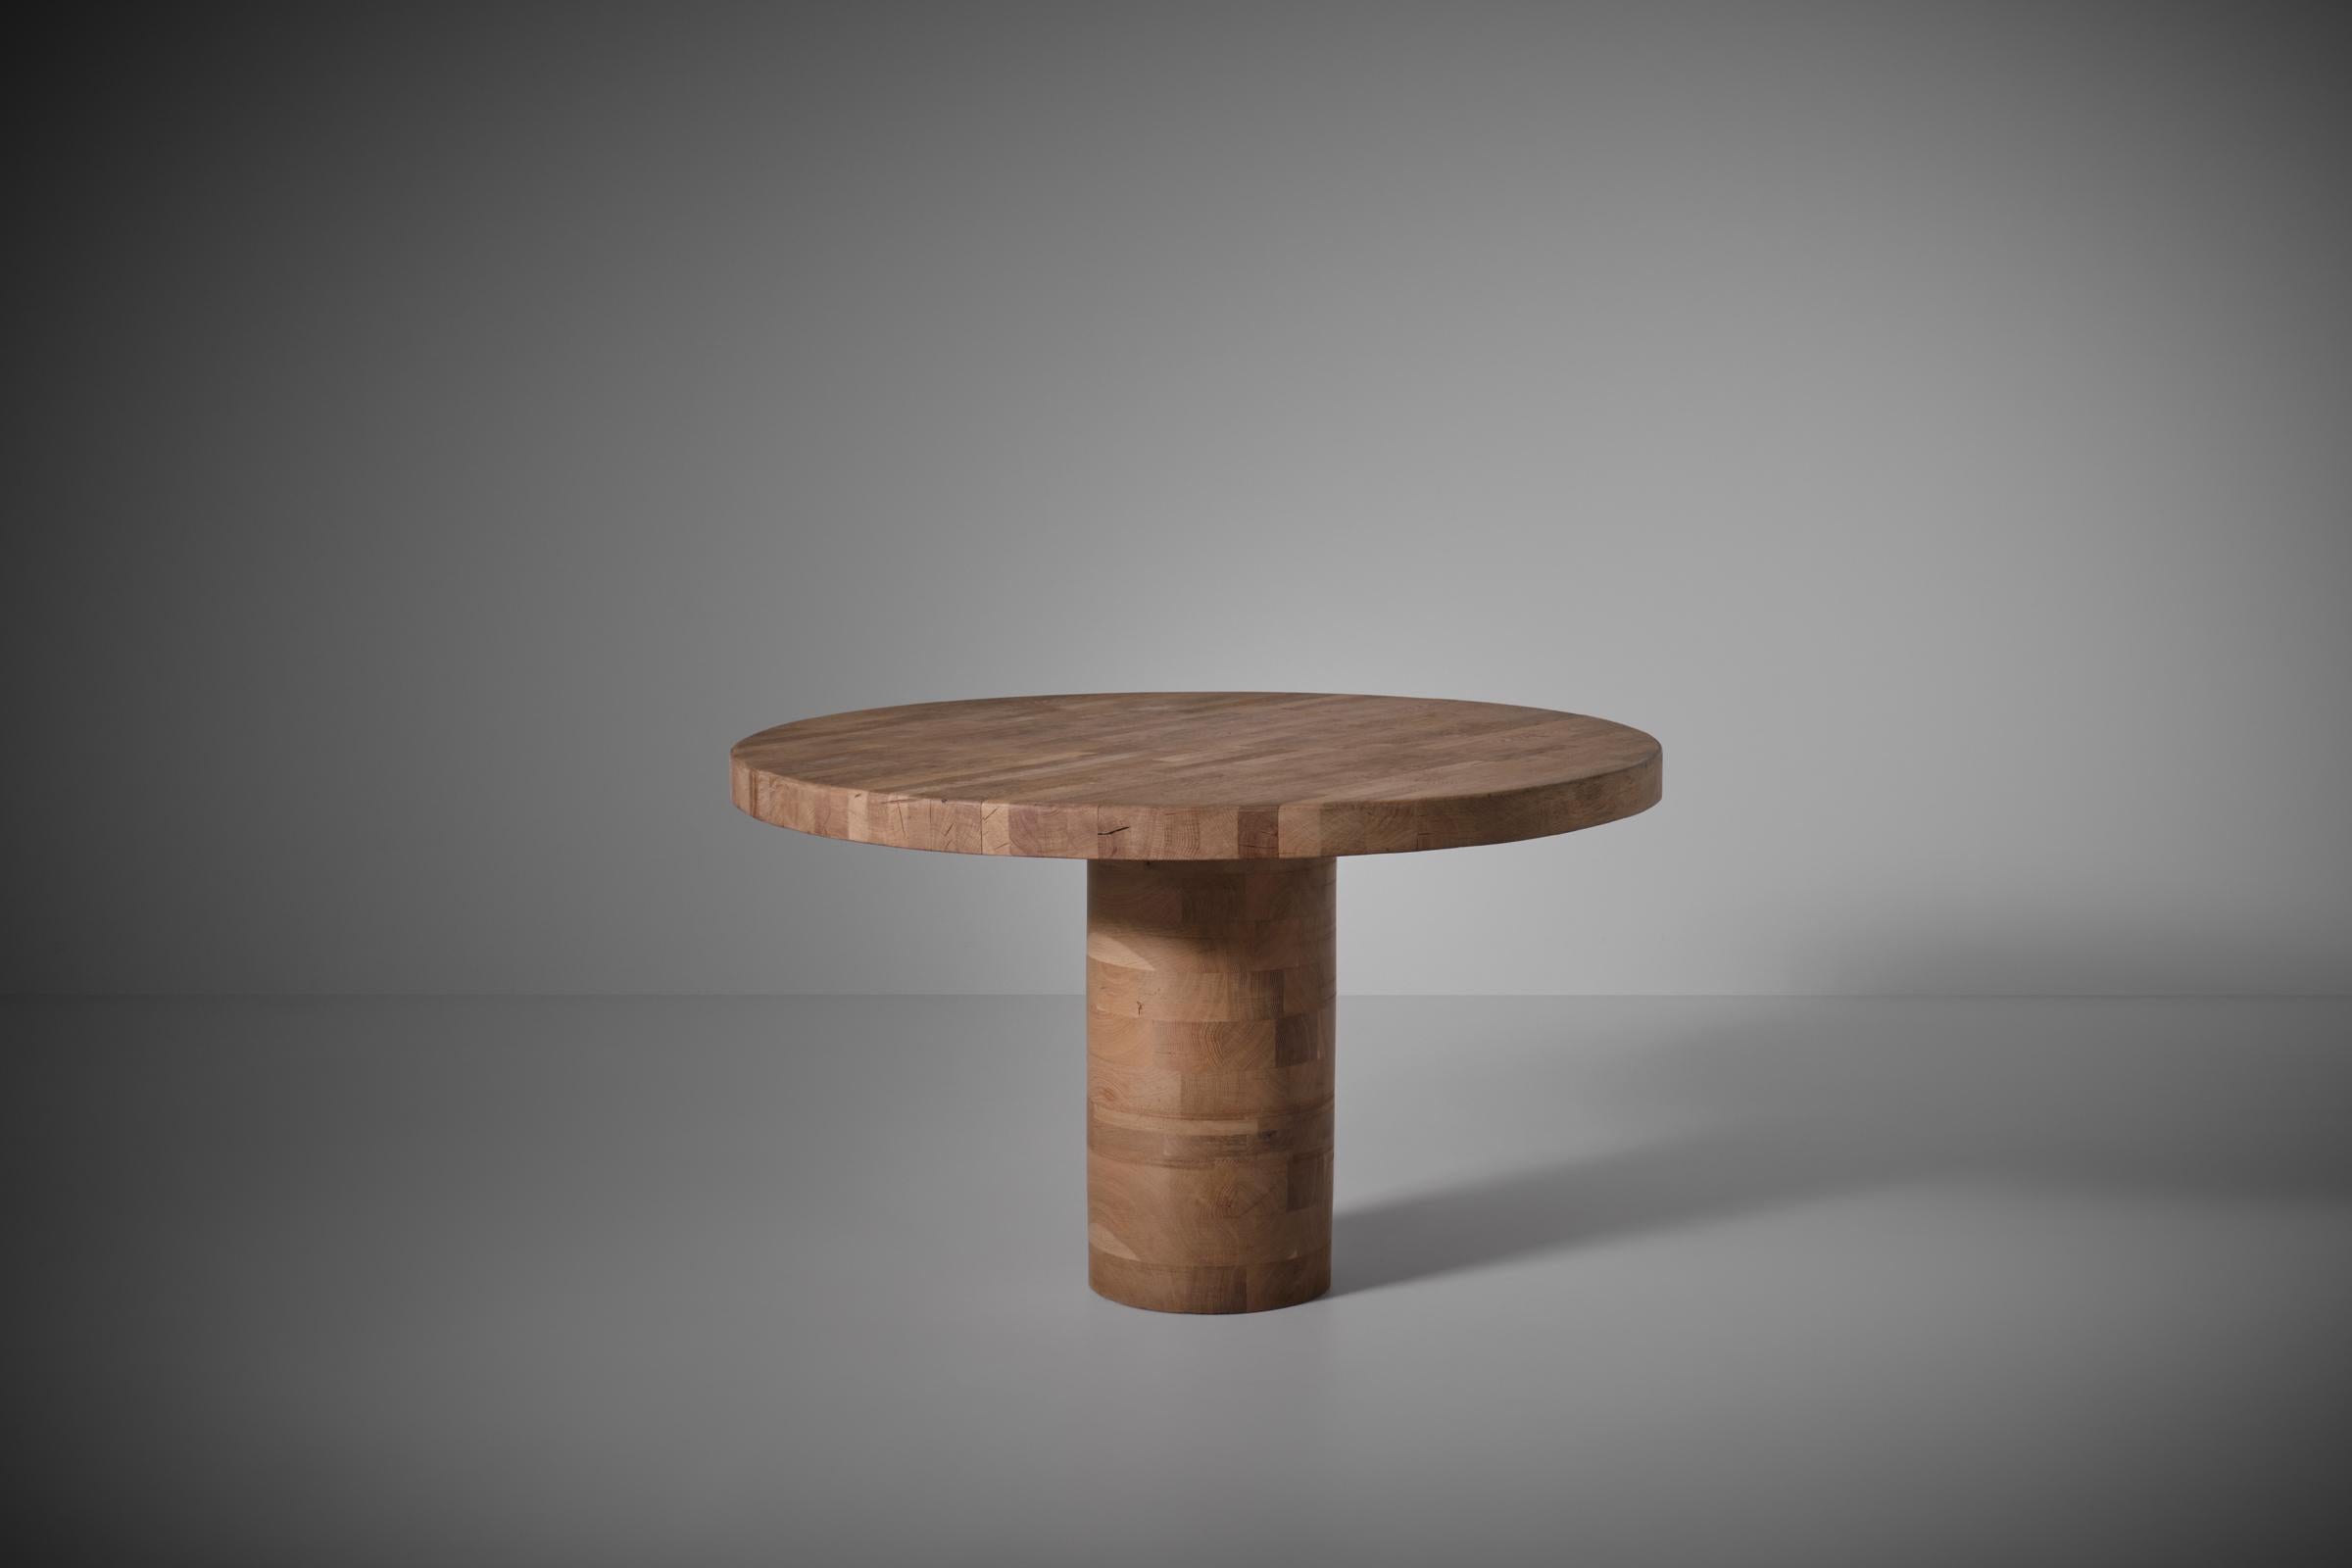 Round Oak dining table with cylinder base, 1970s. Heavy 7 cm thick round top constructed from different slats of solid oak, creating a beautiful pattern. The top is mounted on a cylinder shaped base made from different layers of solid Oak, resulting